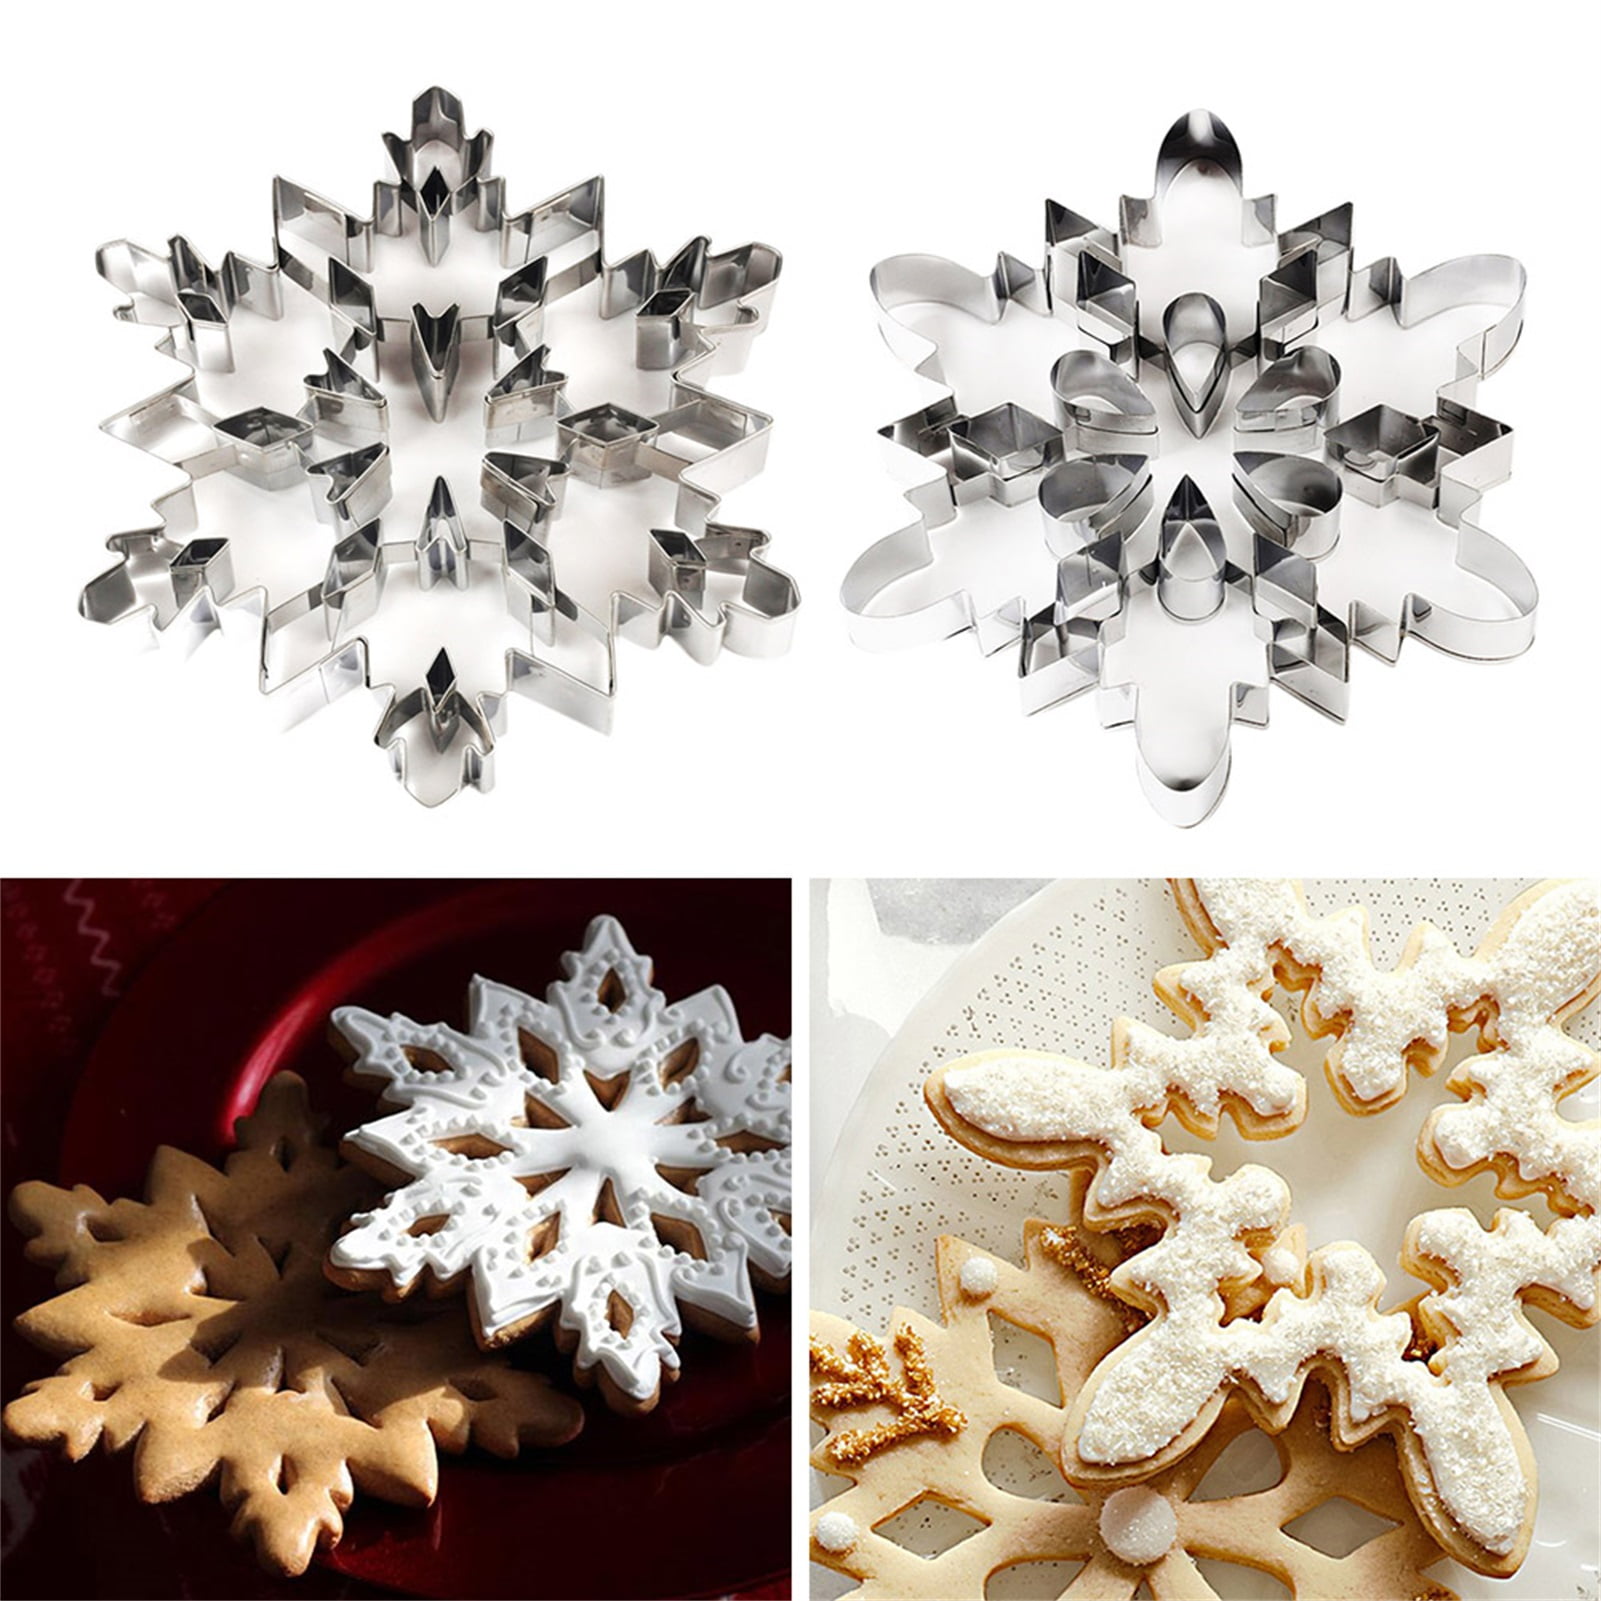 Visland Snowflake Cookie Cutters Decorating Fondant Embossing Tool Snowflake Plunger Cake Cutter,DIY Biscuit Cutter Kitchen Tools